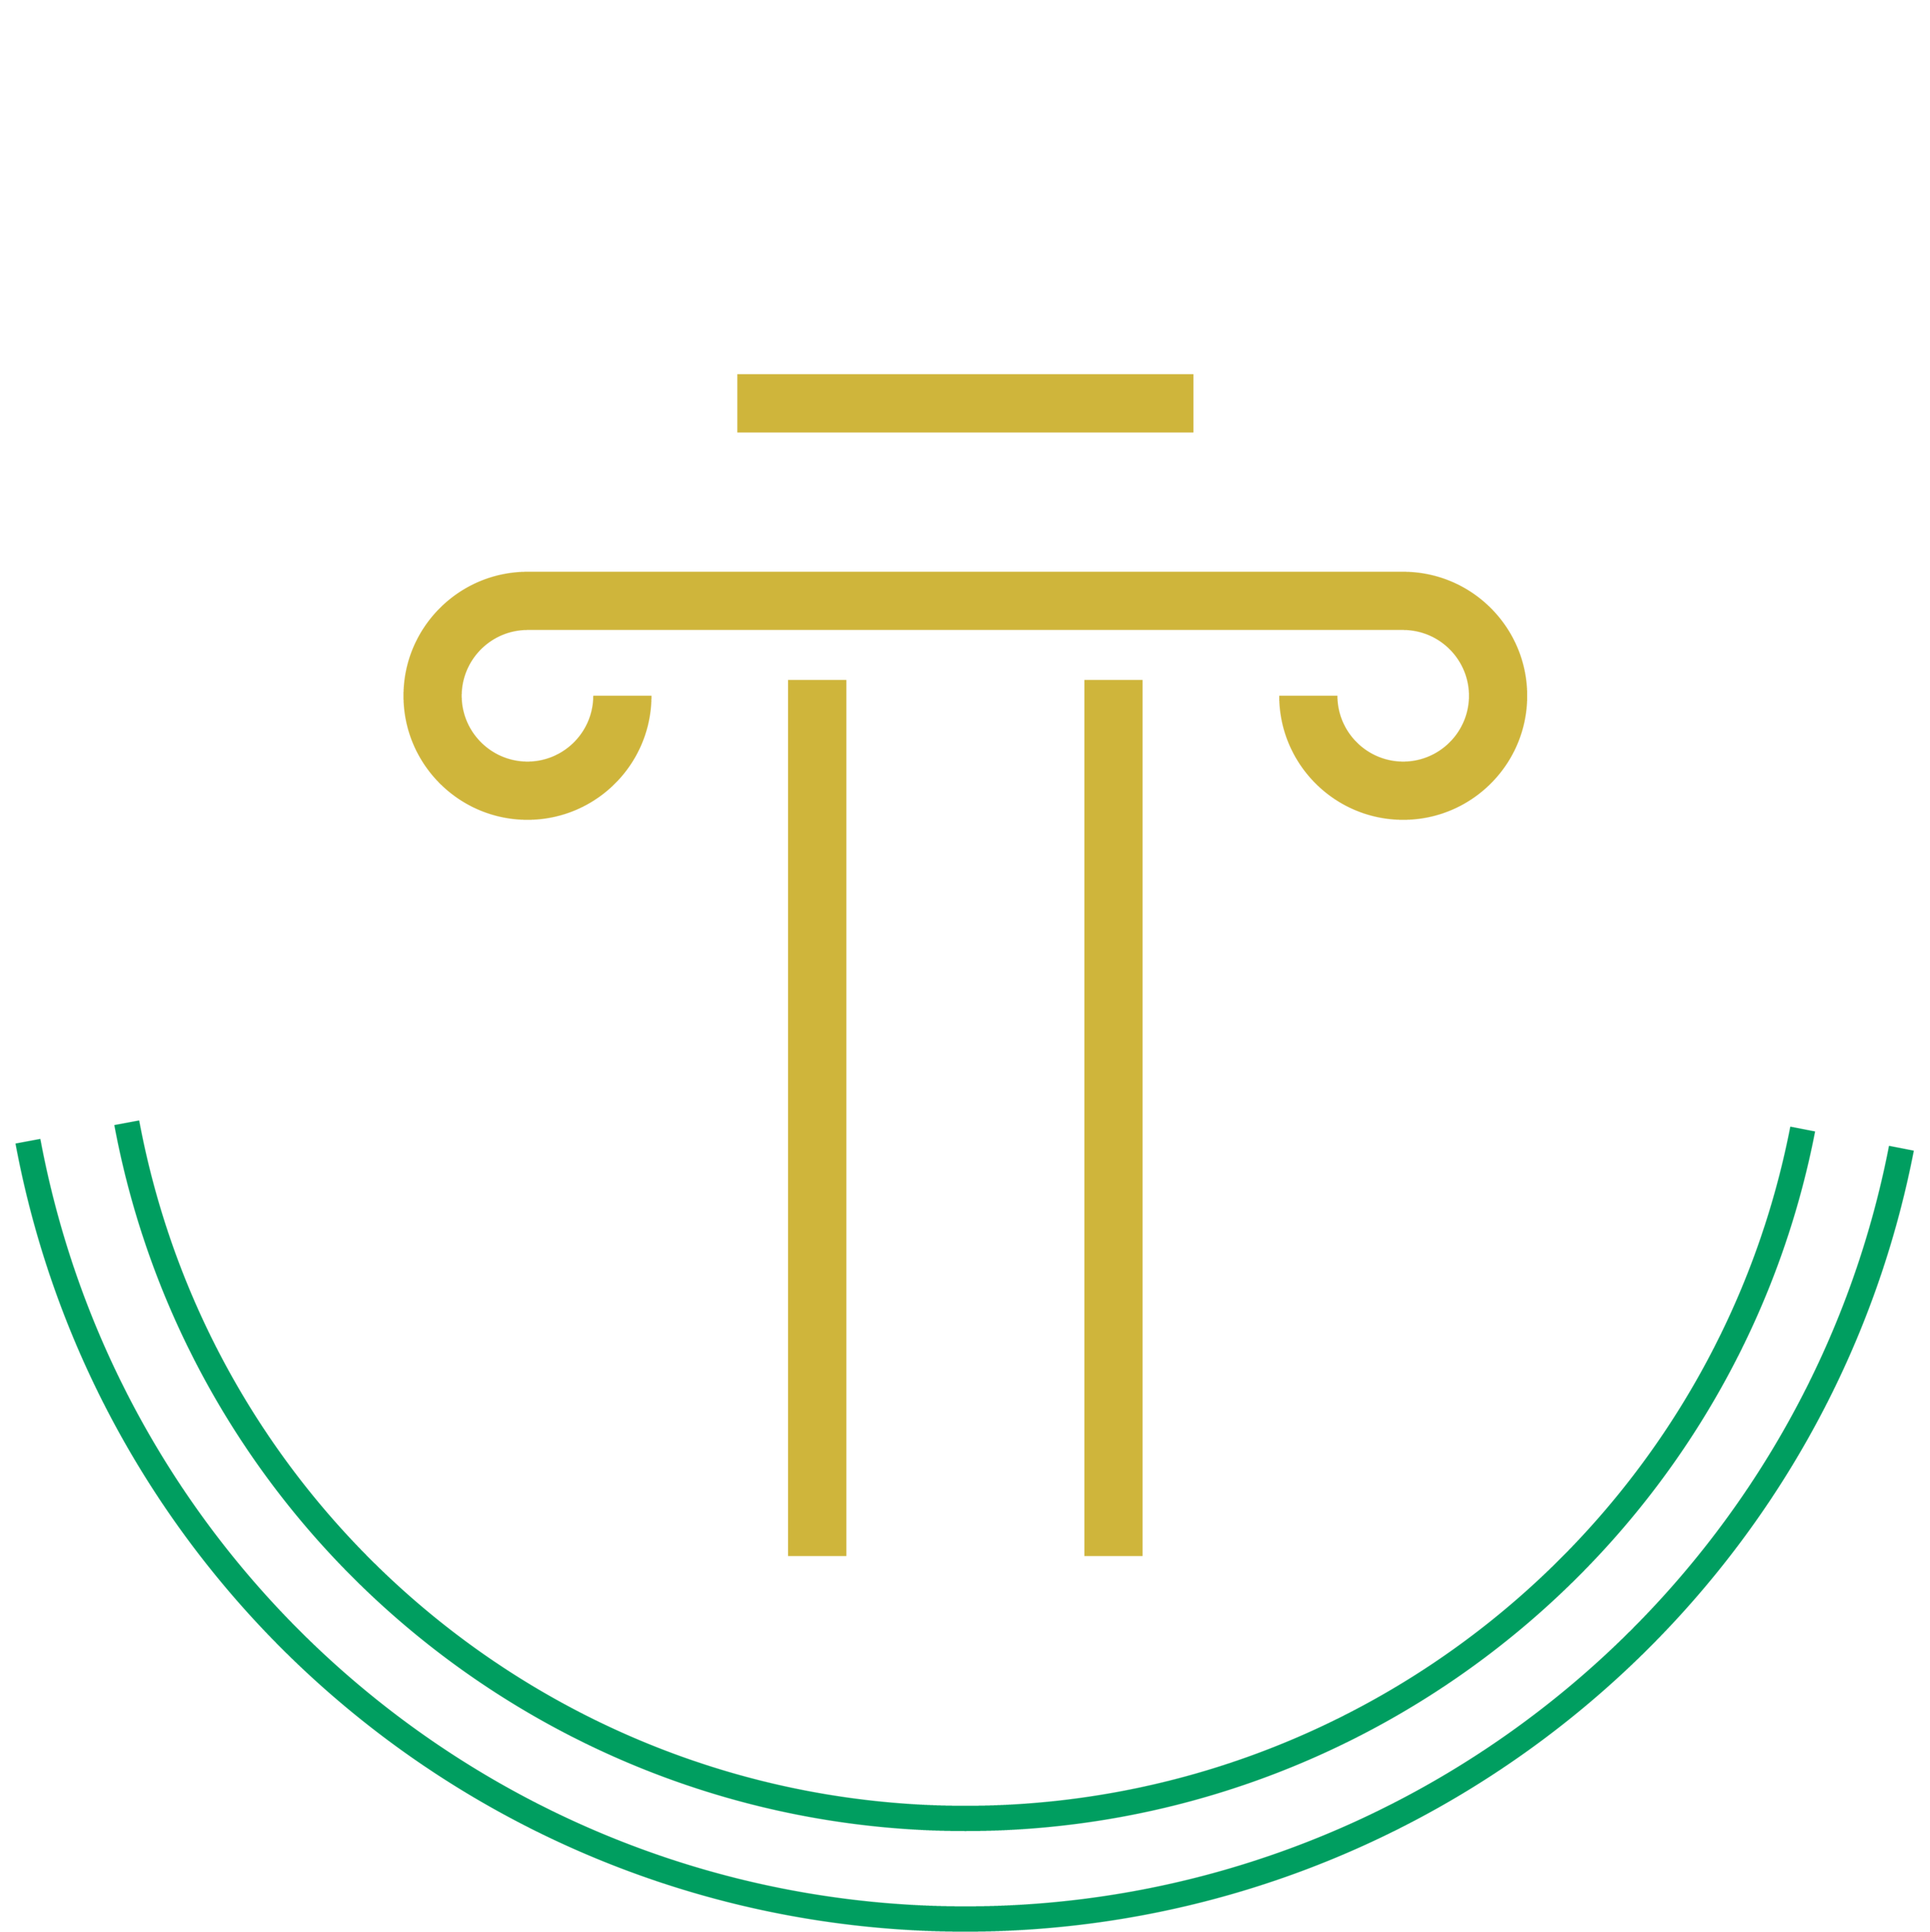 Center for Employment Law